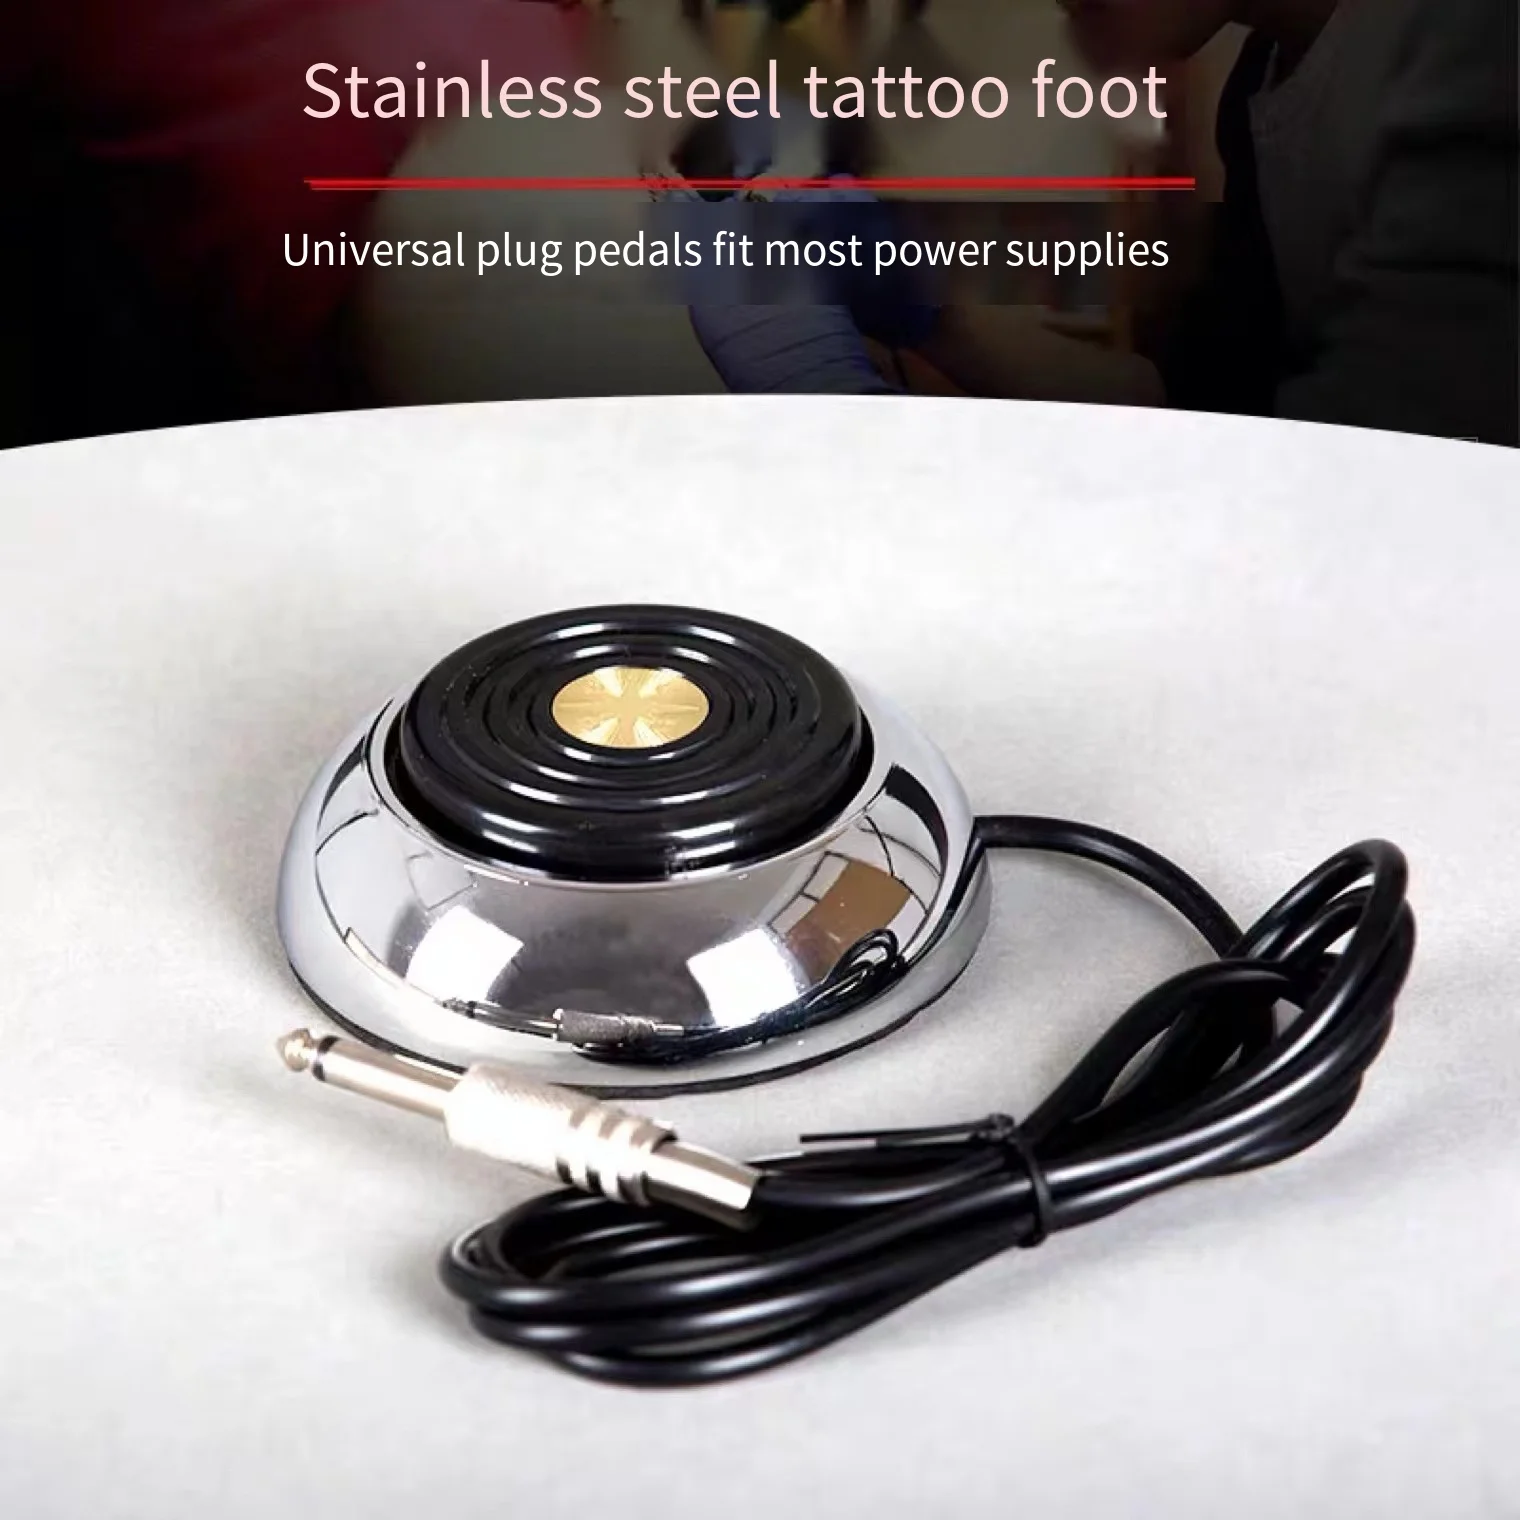 360° Tattoo Foot Pedal Multi-Angle Weighted Tattoo Machine Power Supply Pedal Switch Tattoo Equipment Voltage Regulator Makeup mooer ge100 guitar multi effects processor effect pedal